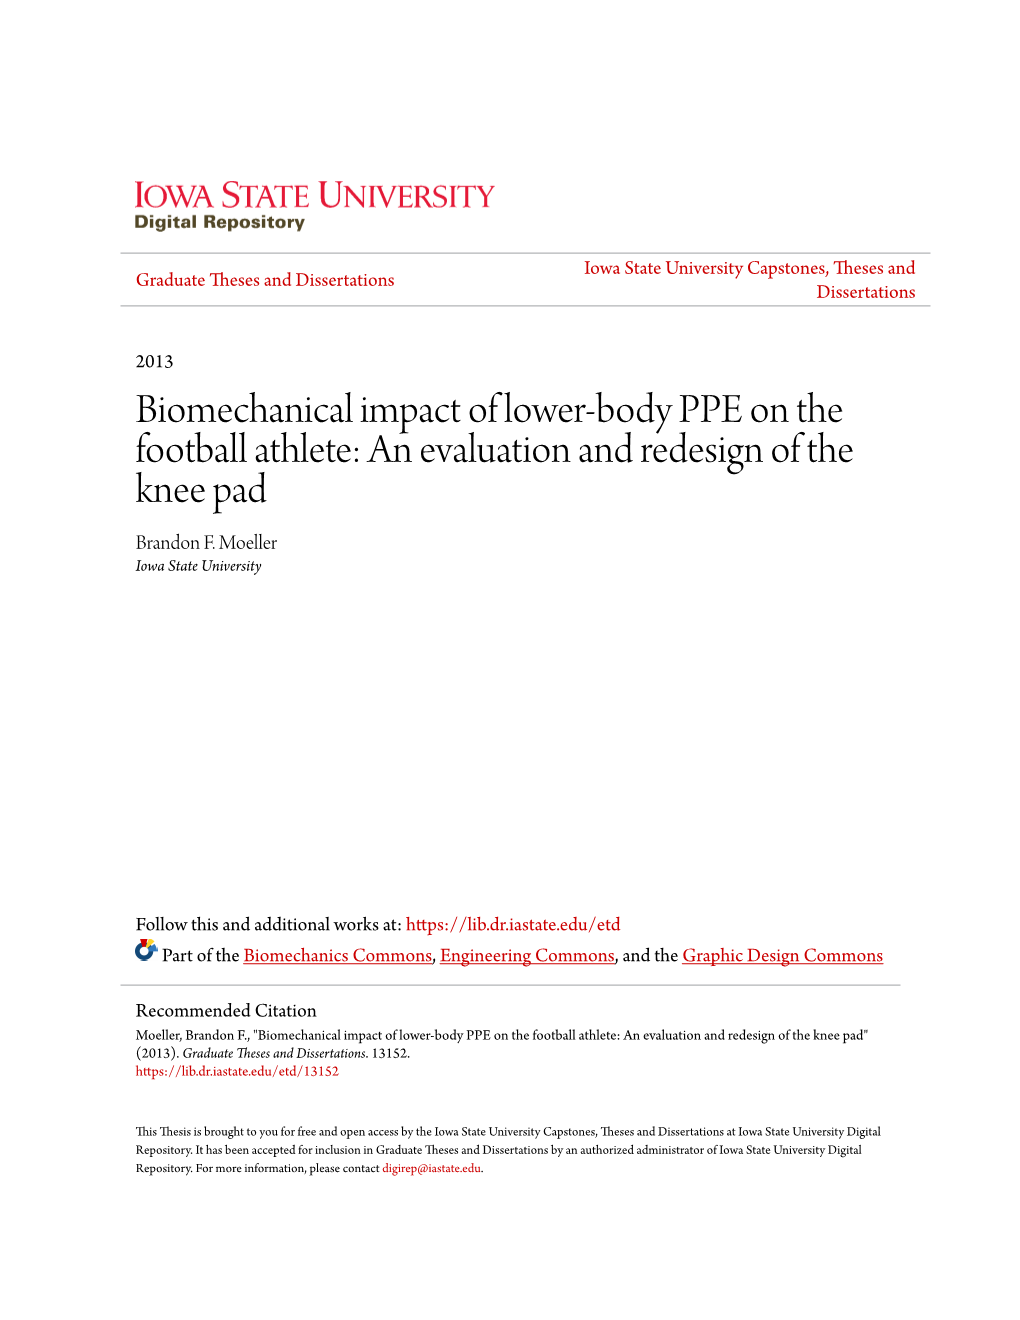 Biomechanical Impact of Lower-Body PPE on the Football Athlete: an Evaluation and Redesign of the Knee Pad Brandon F